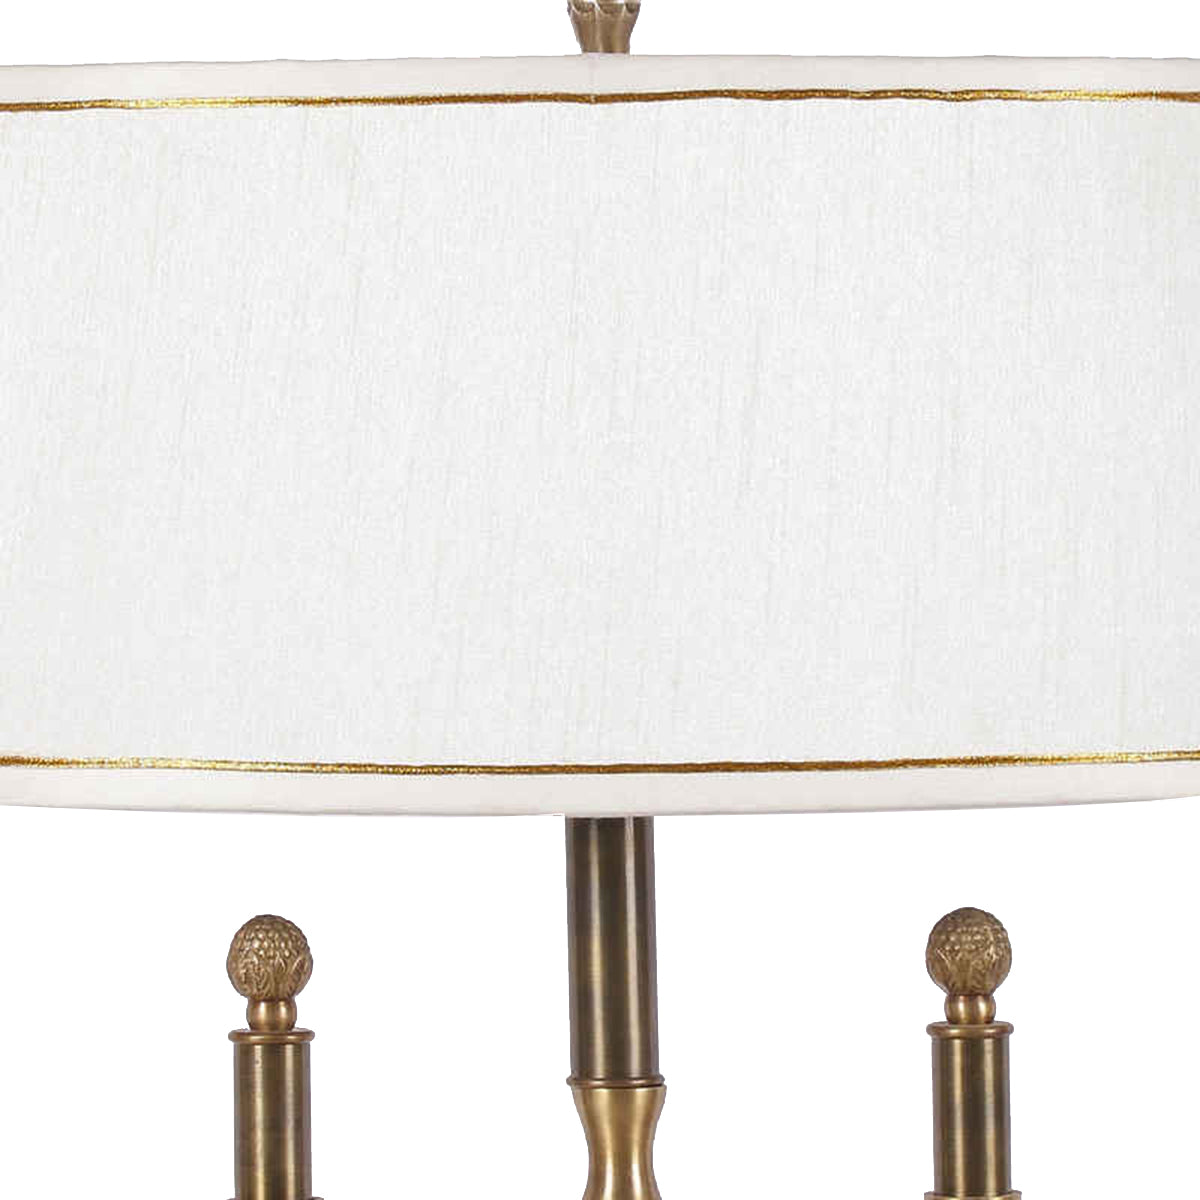 Detec White Fabric Shade Table Lamp with Gold Base